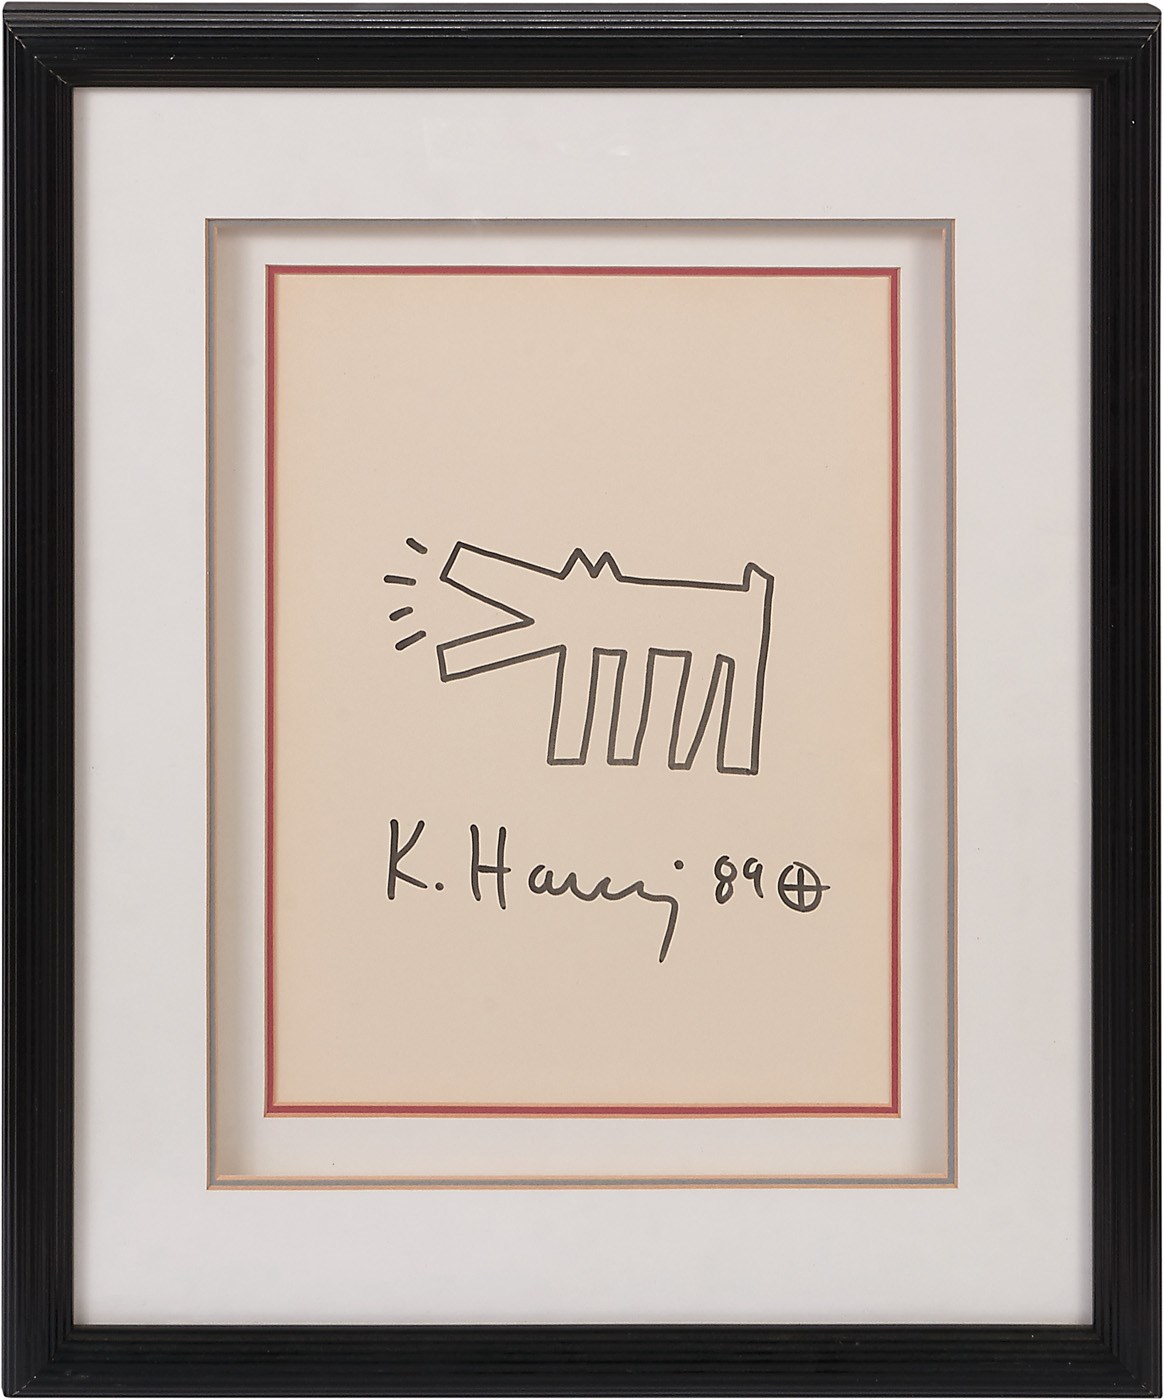 Rock And Pop Culture - 1989 "Barking Dog" Original Drawing by Keith Haring (ex-Charlie Sheen Collection)